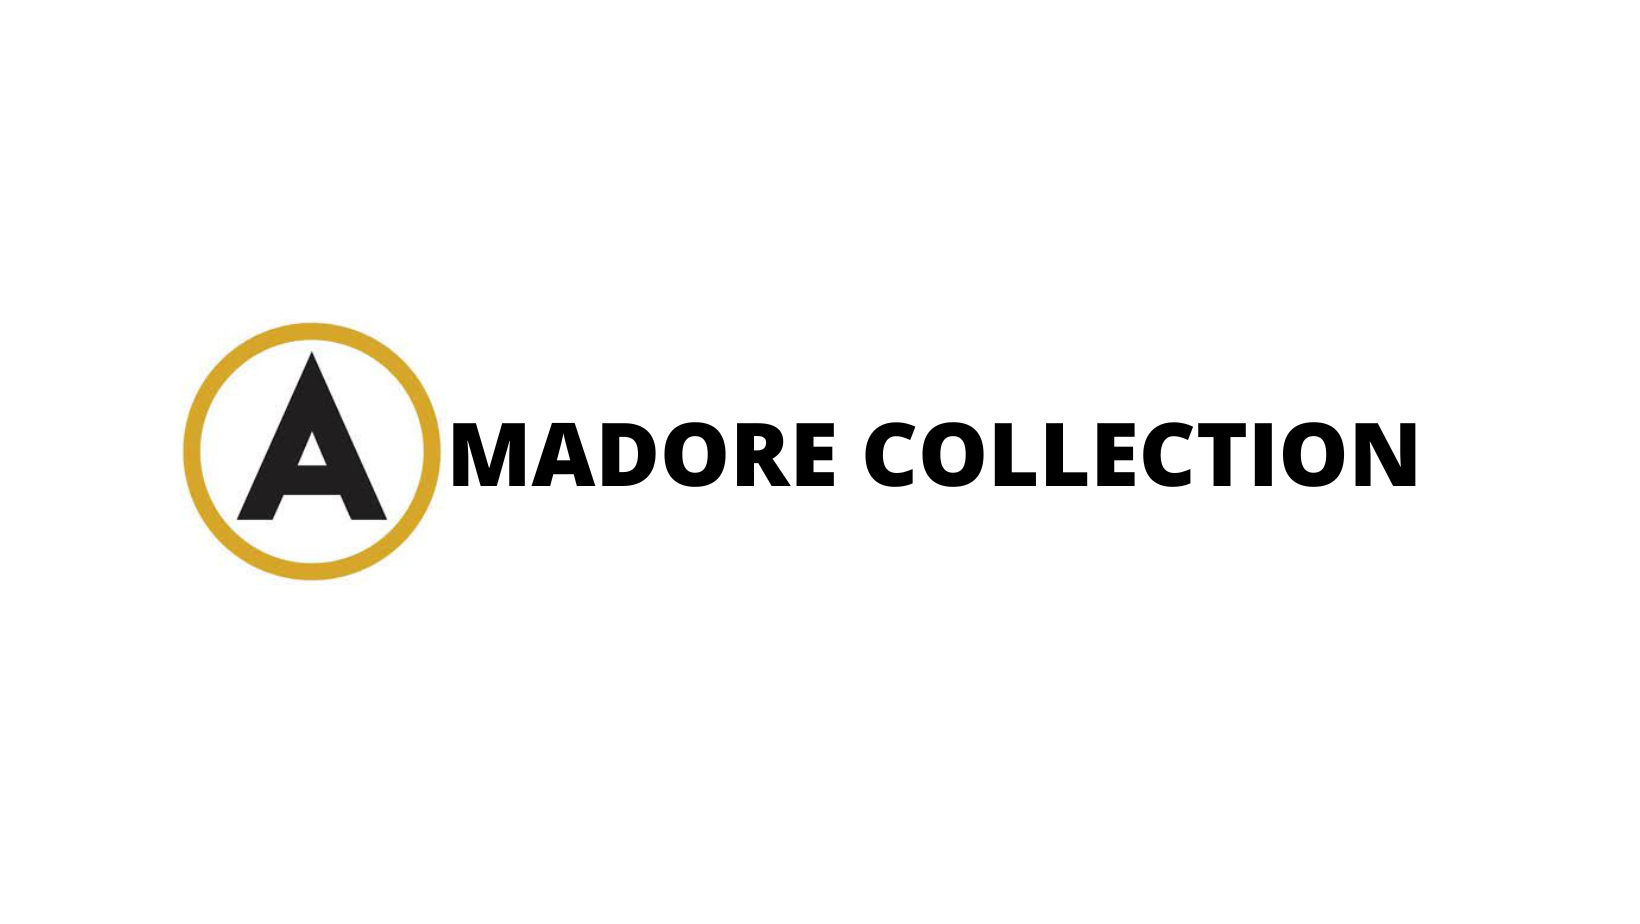 AMADORE COLLECTION